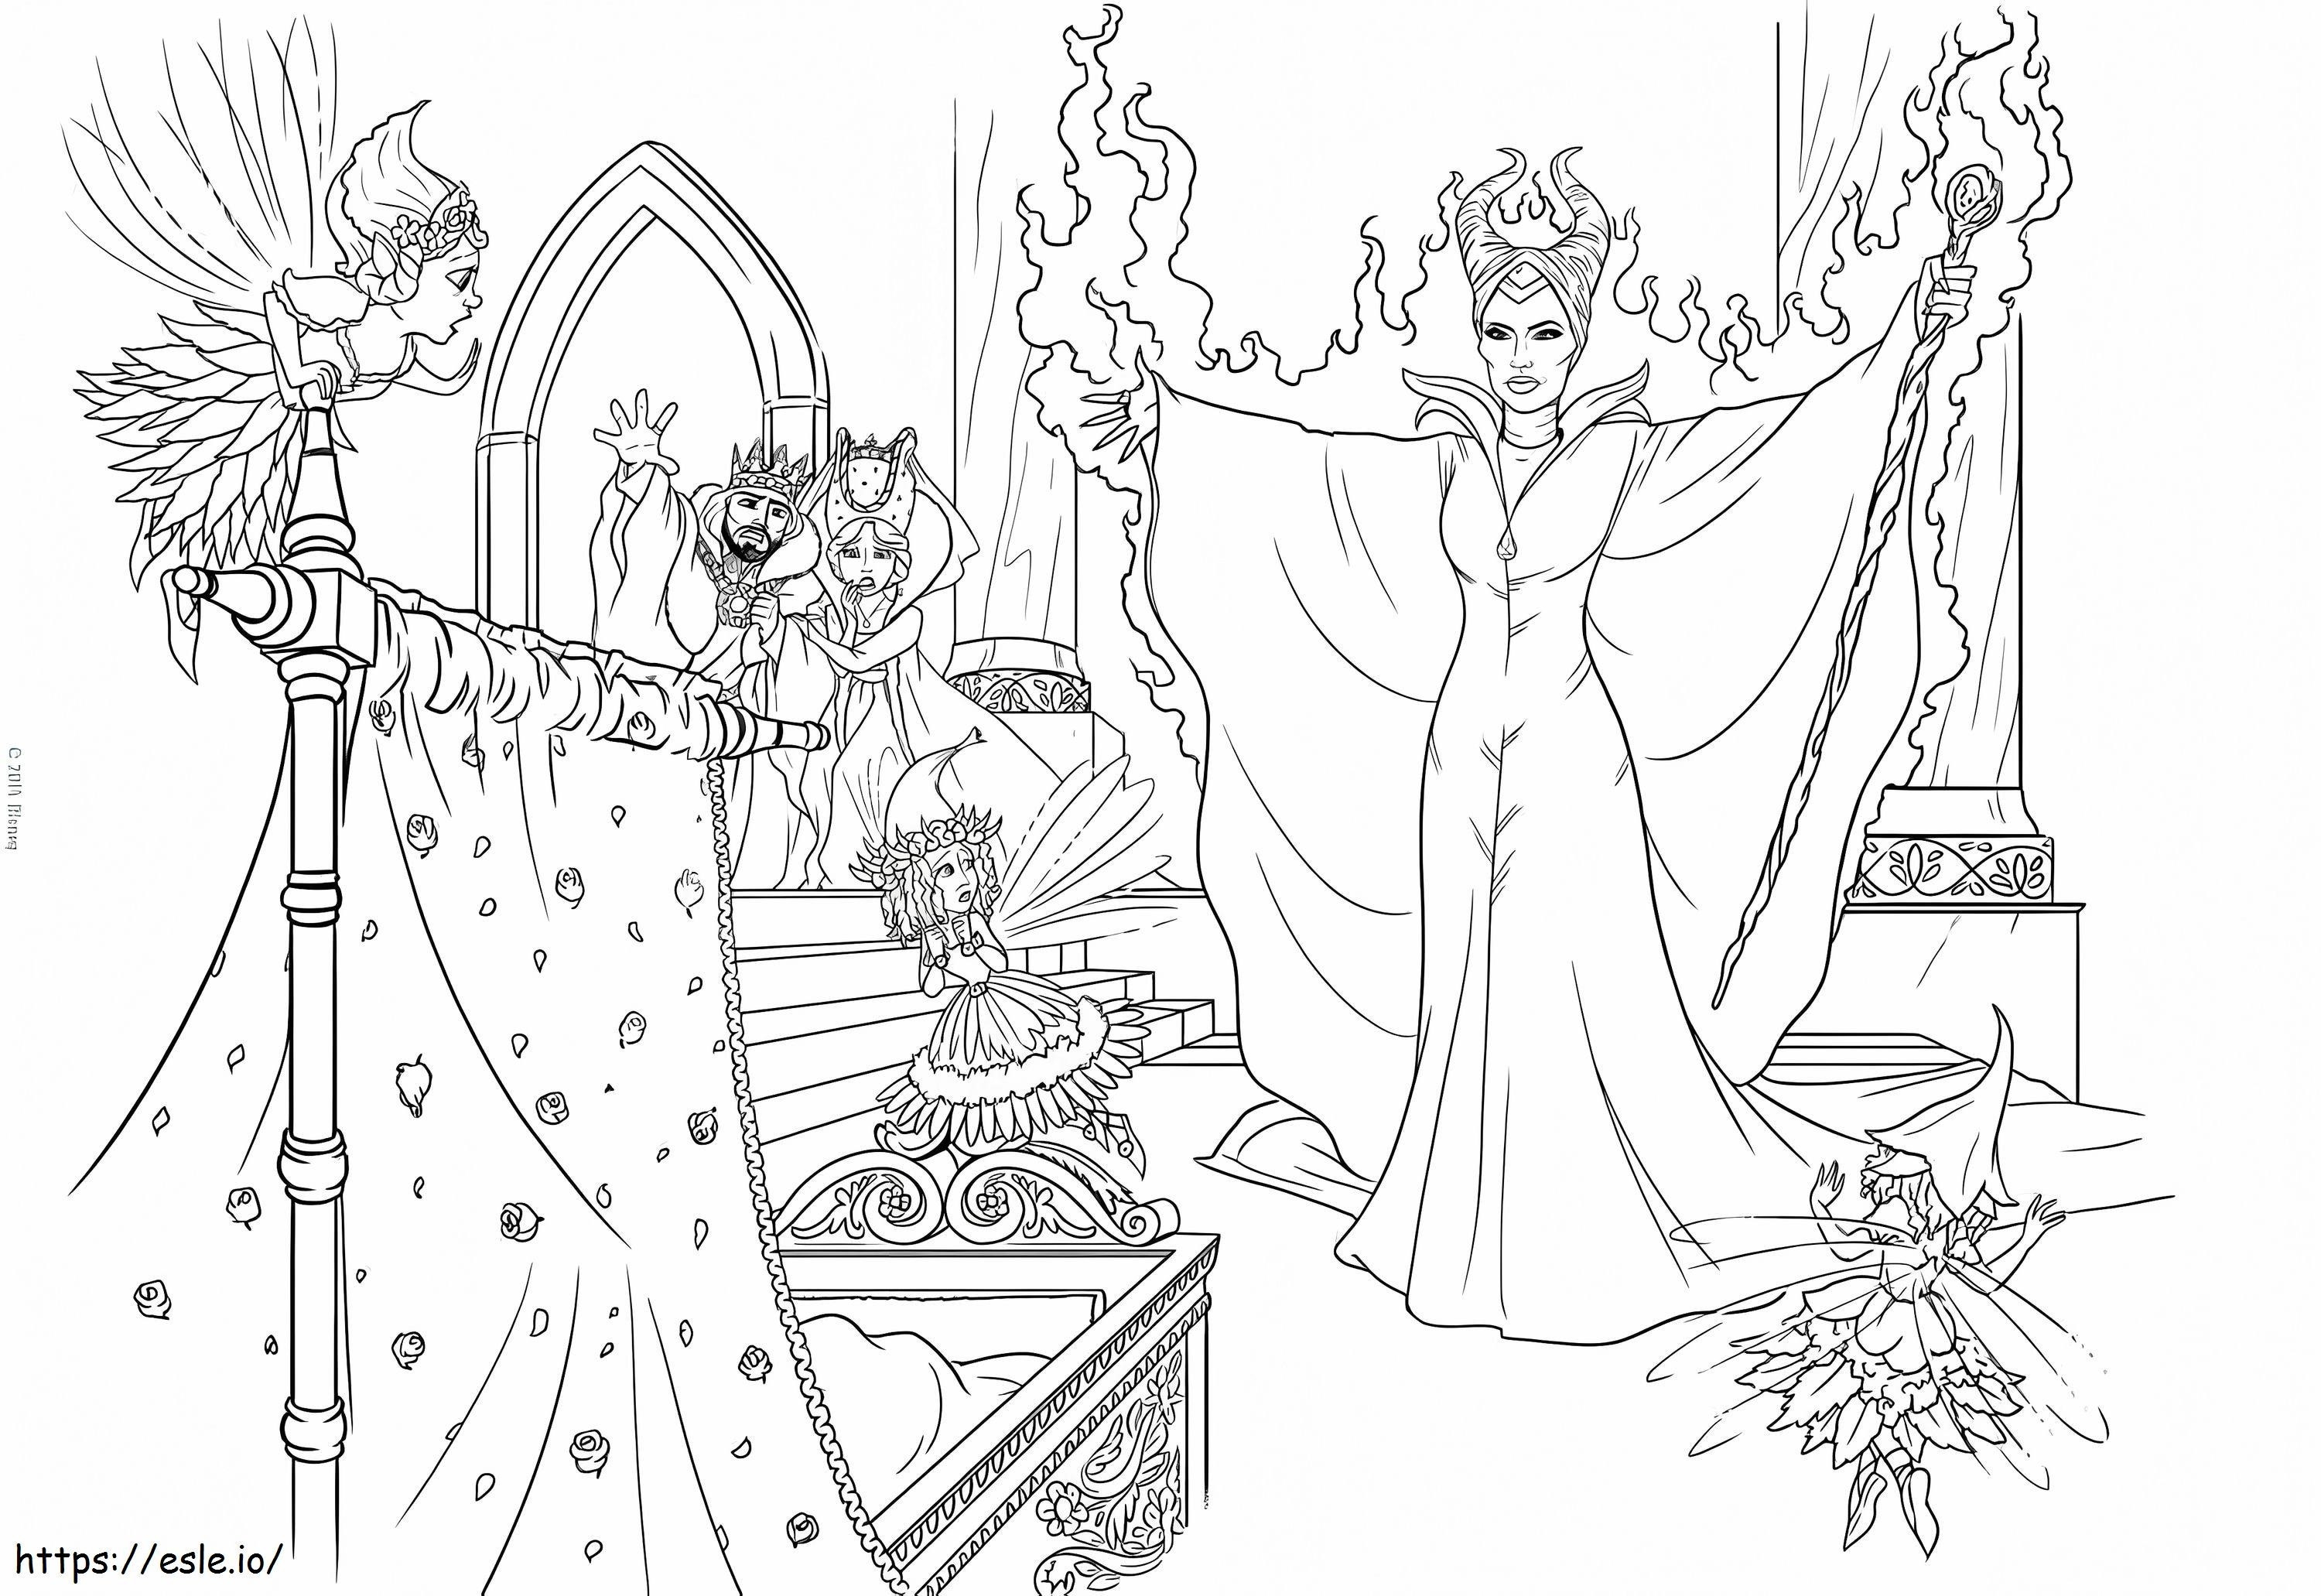 Maleficent Curses Aurora coloring page